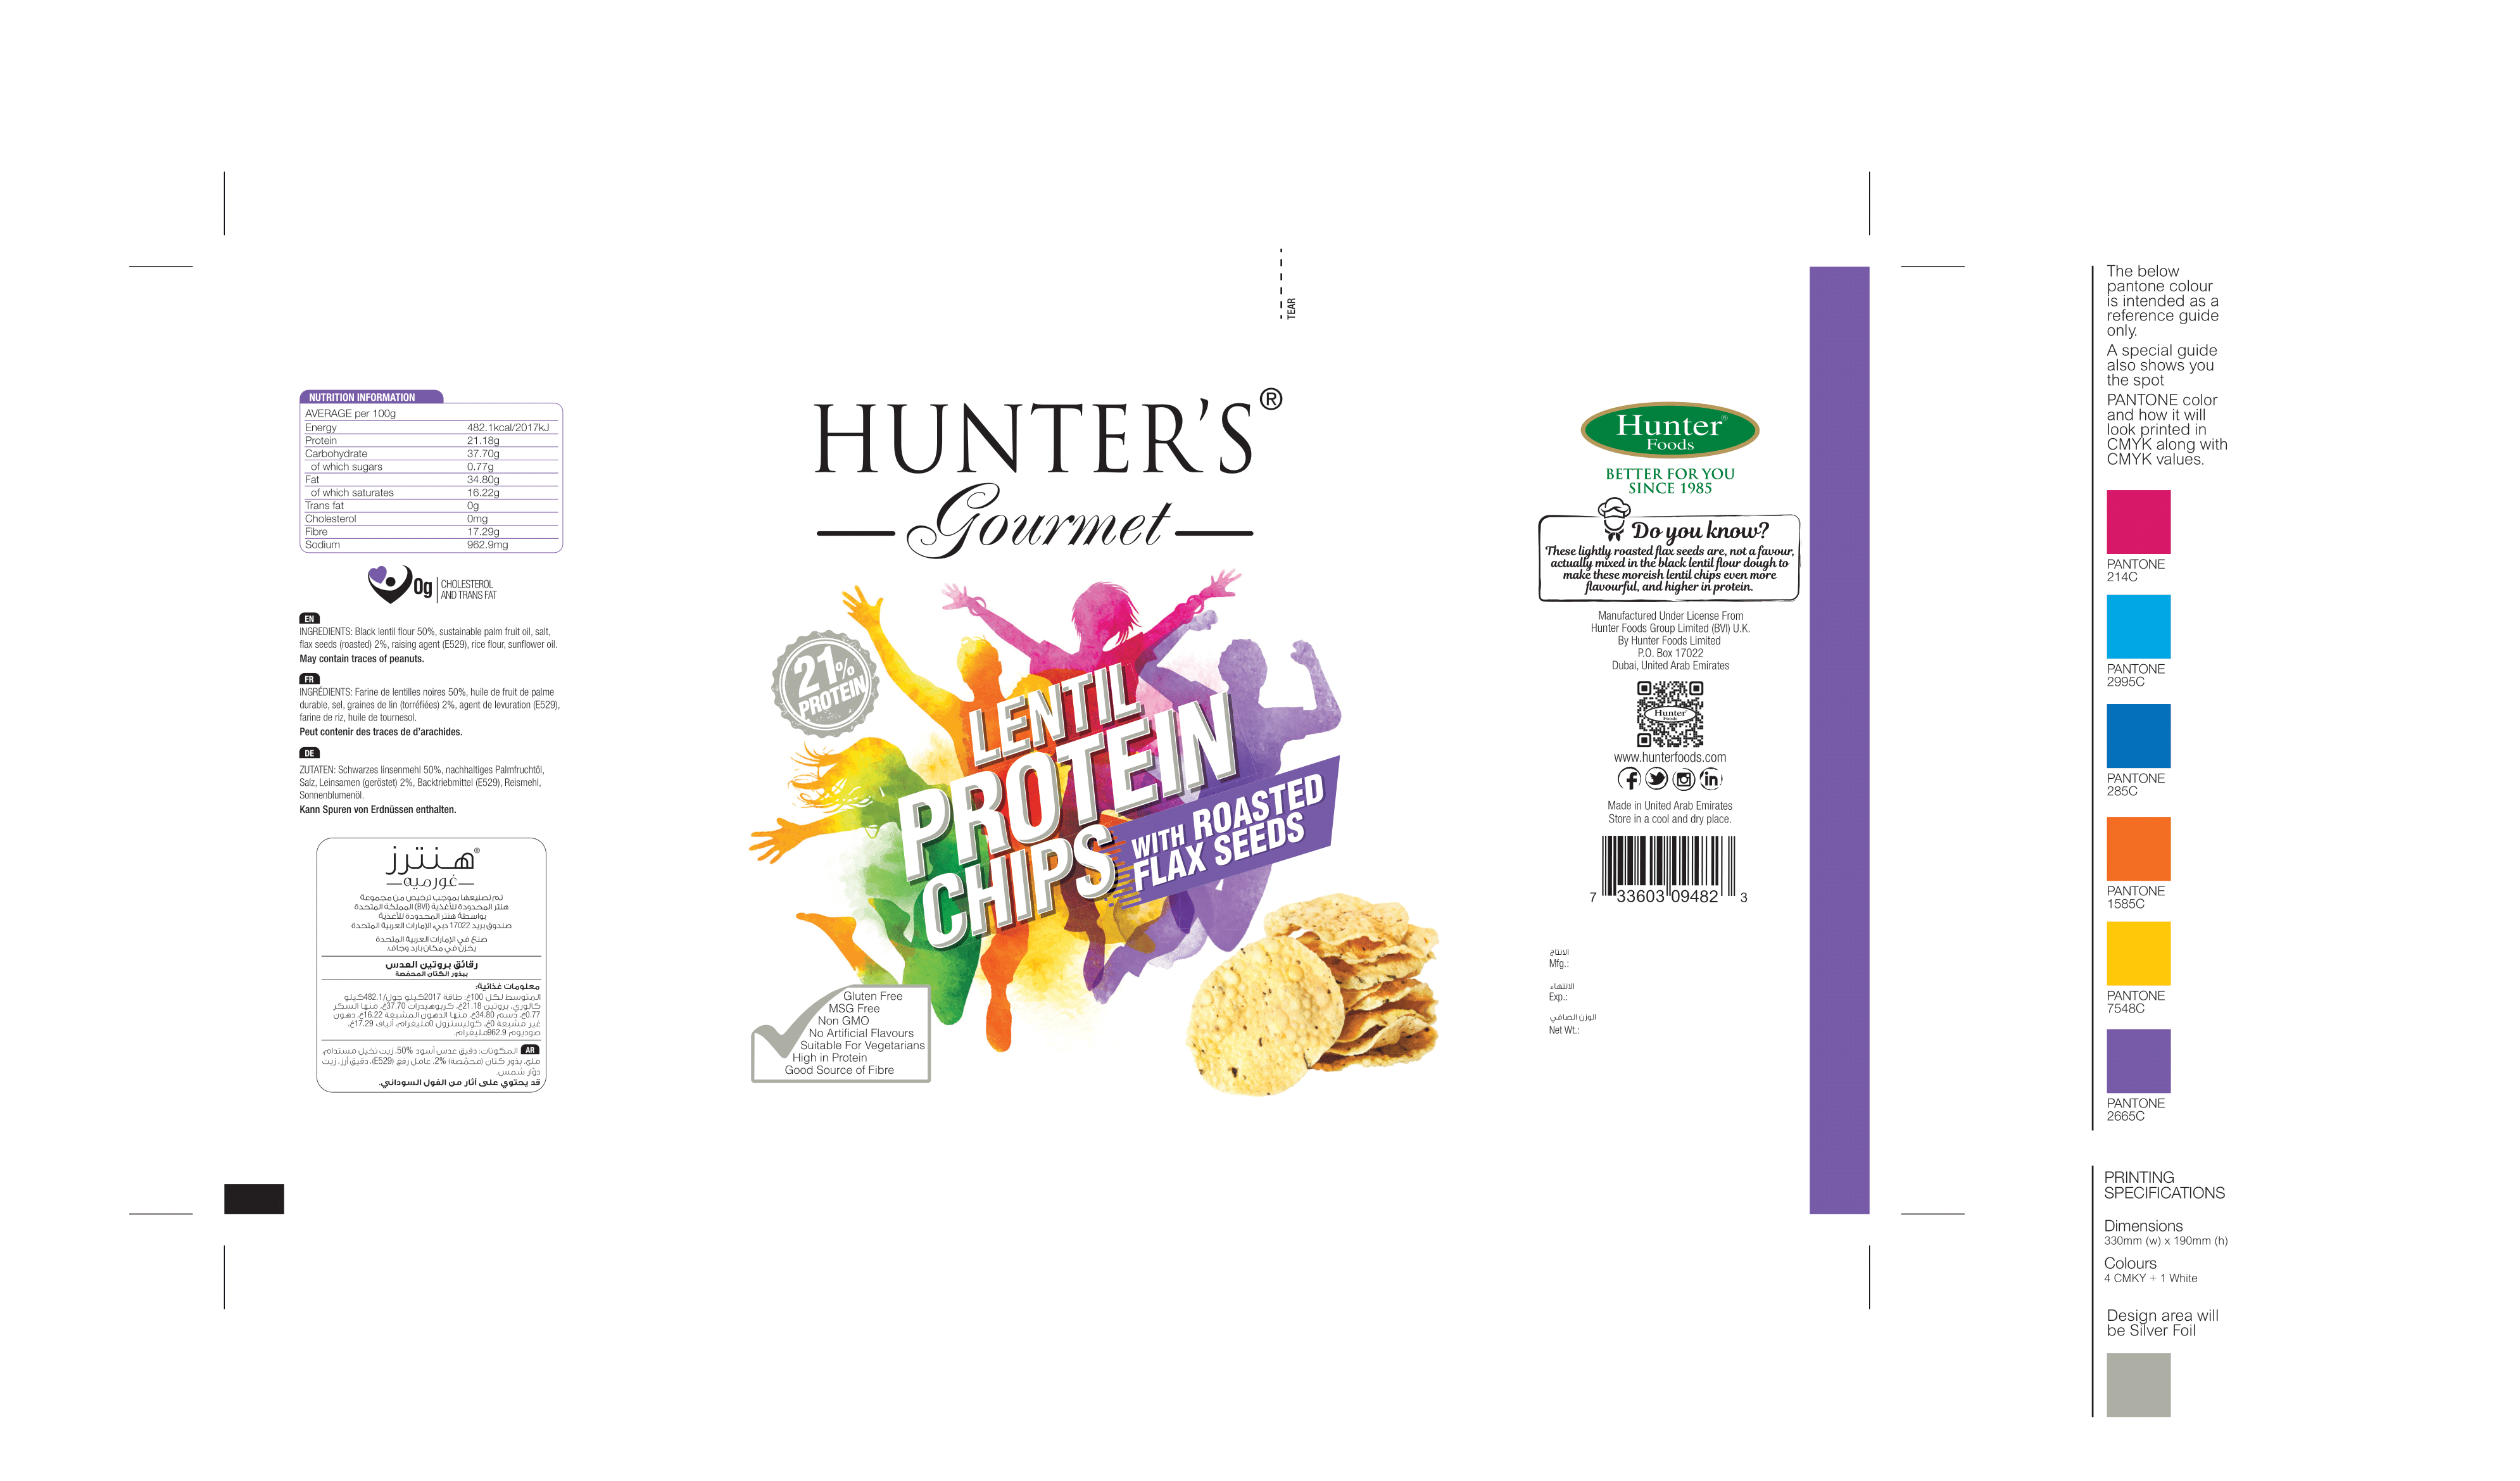 Hunter's Gourmet Lentil Protein Chips with Roasted Flax Seeds 24 units per case 25 g Product Label